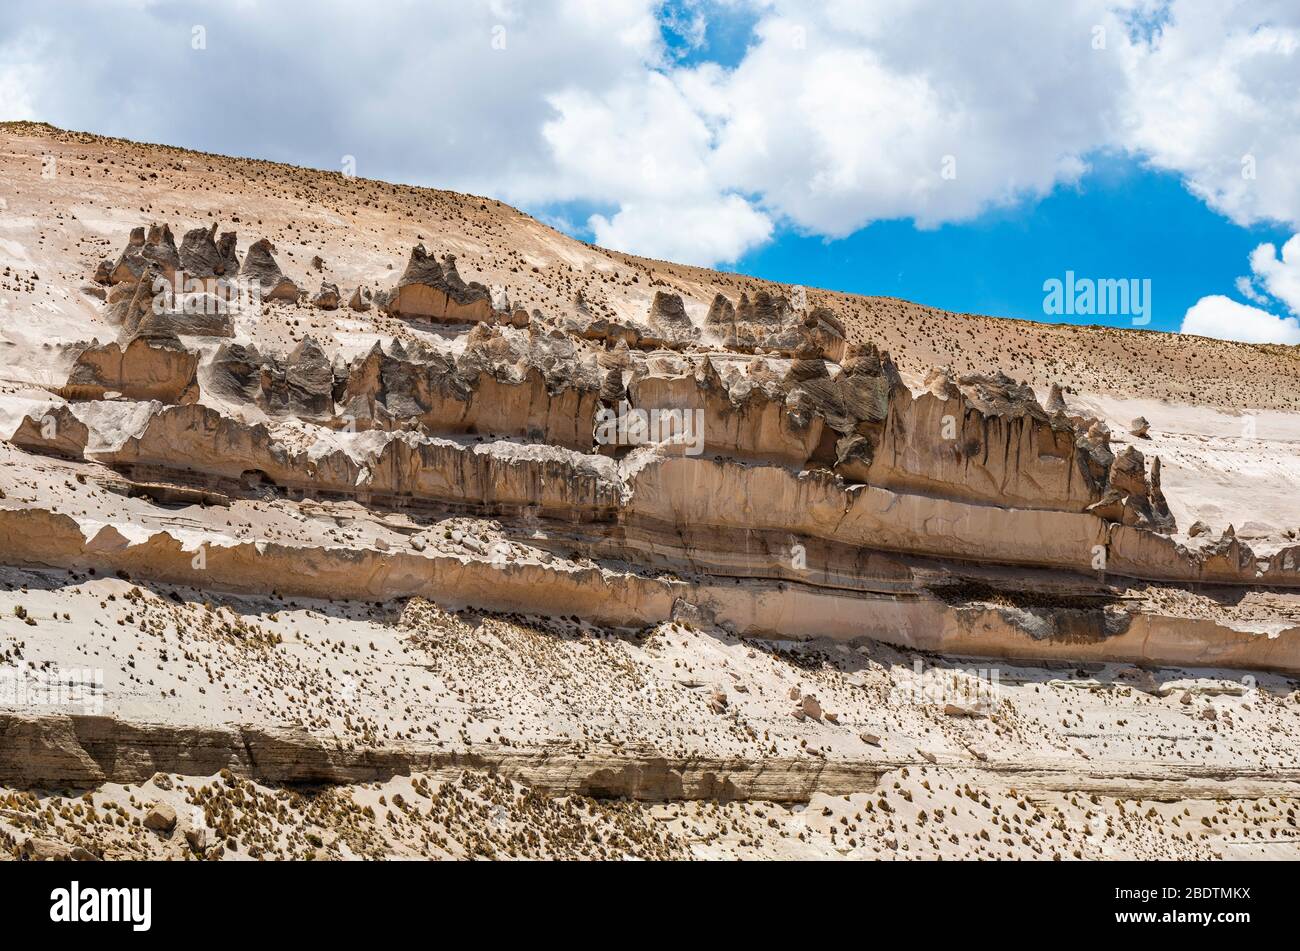 Hoodoo geology formations in the national reserve of Salinas y Agua Blanca located between Arequipa and the Colca Canyon, Andes mountains, Peru. Stock Photo